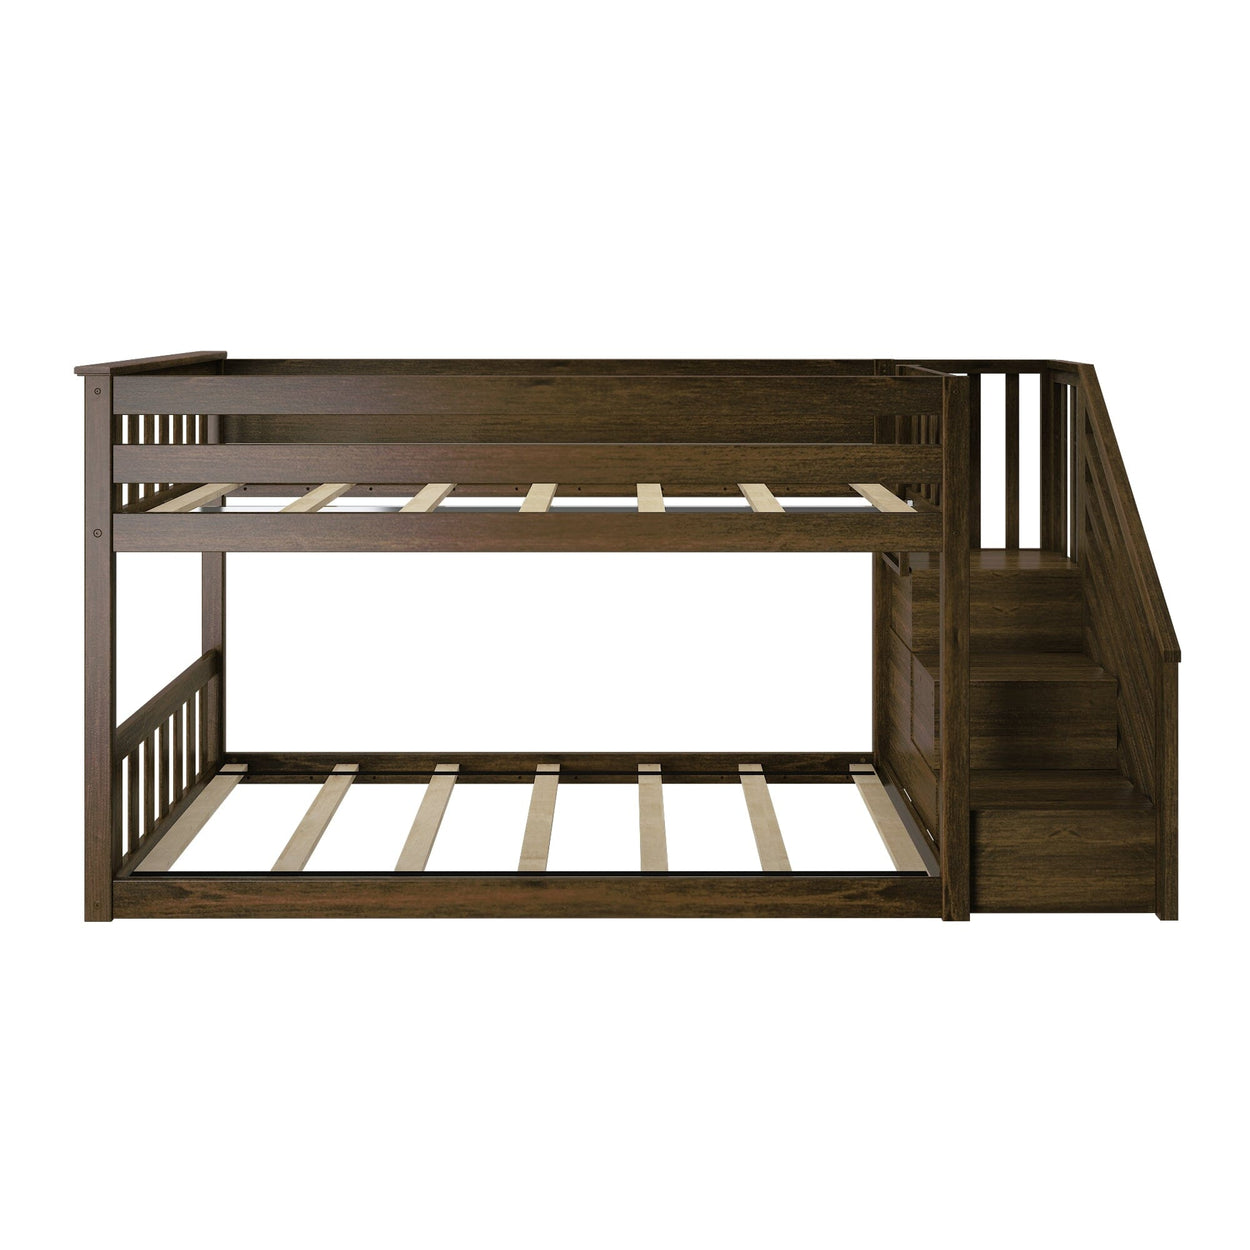 185220-008 : Bunk Beds Twin over Twin Low Bunk Bed with Staircase, Walnut